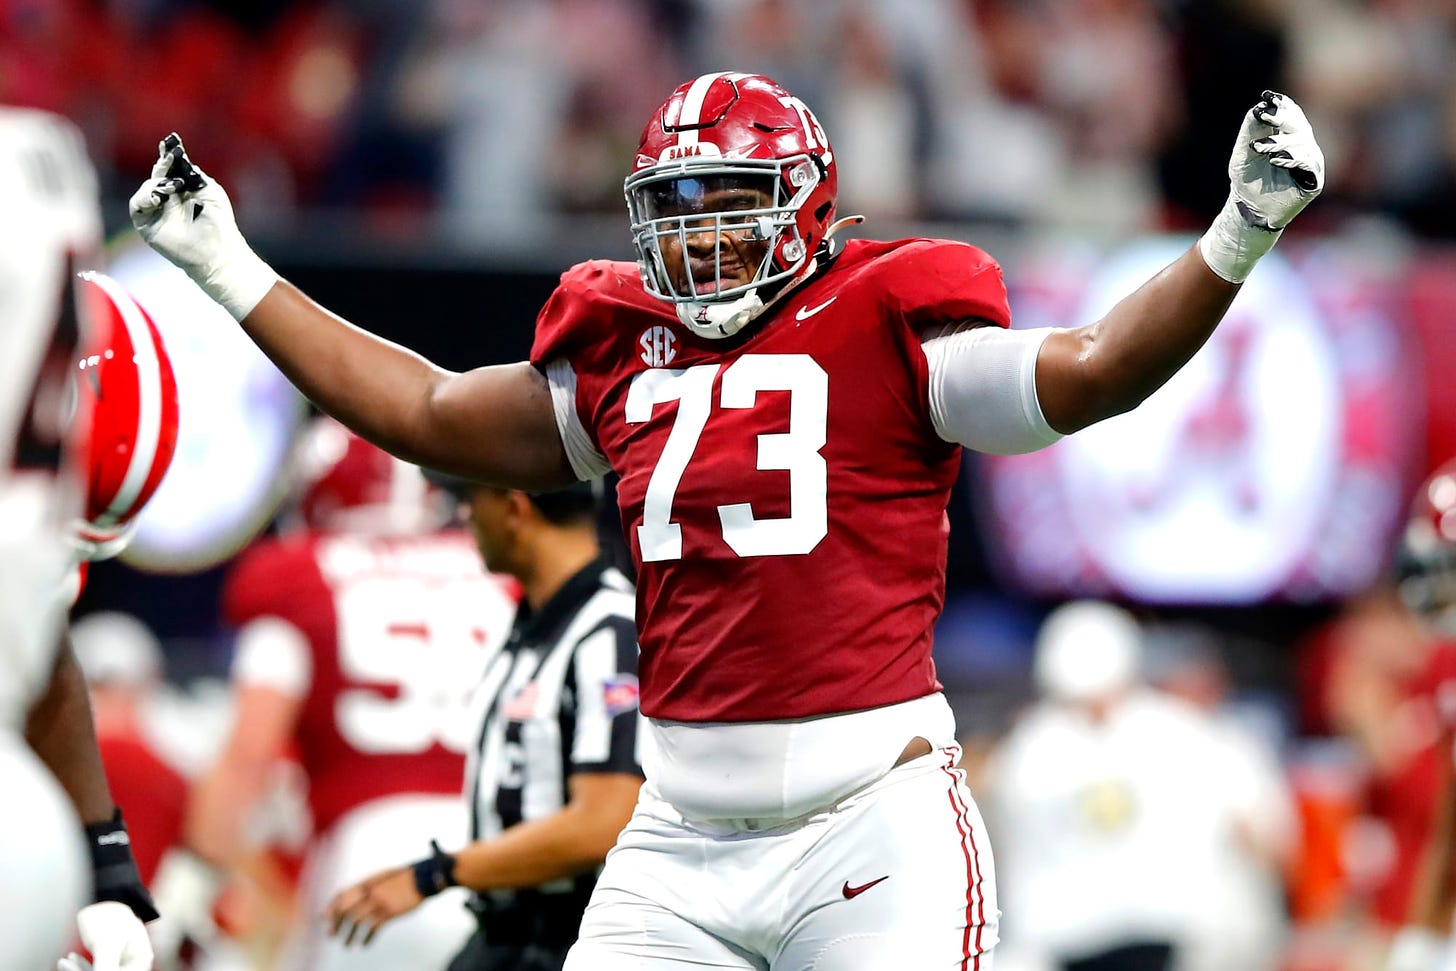 NFL Draft: Would Alabama's Evan Neal fit the New York Giants?